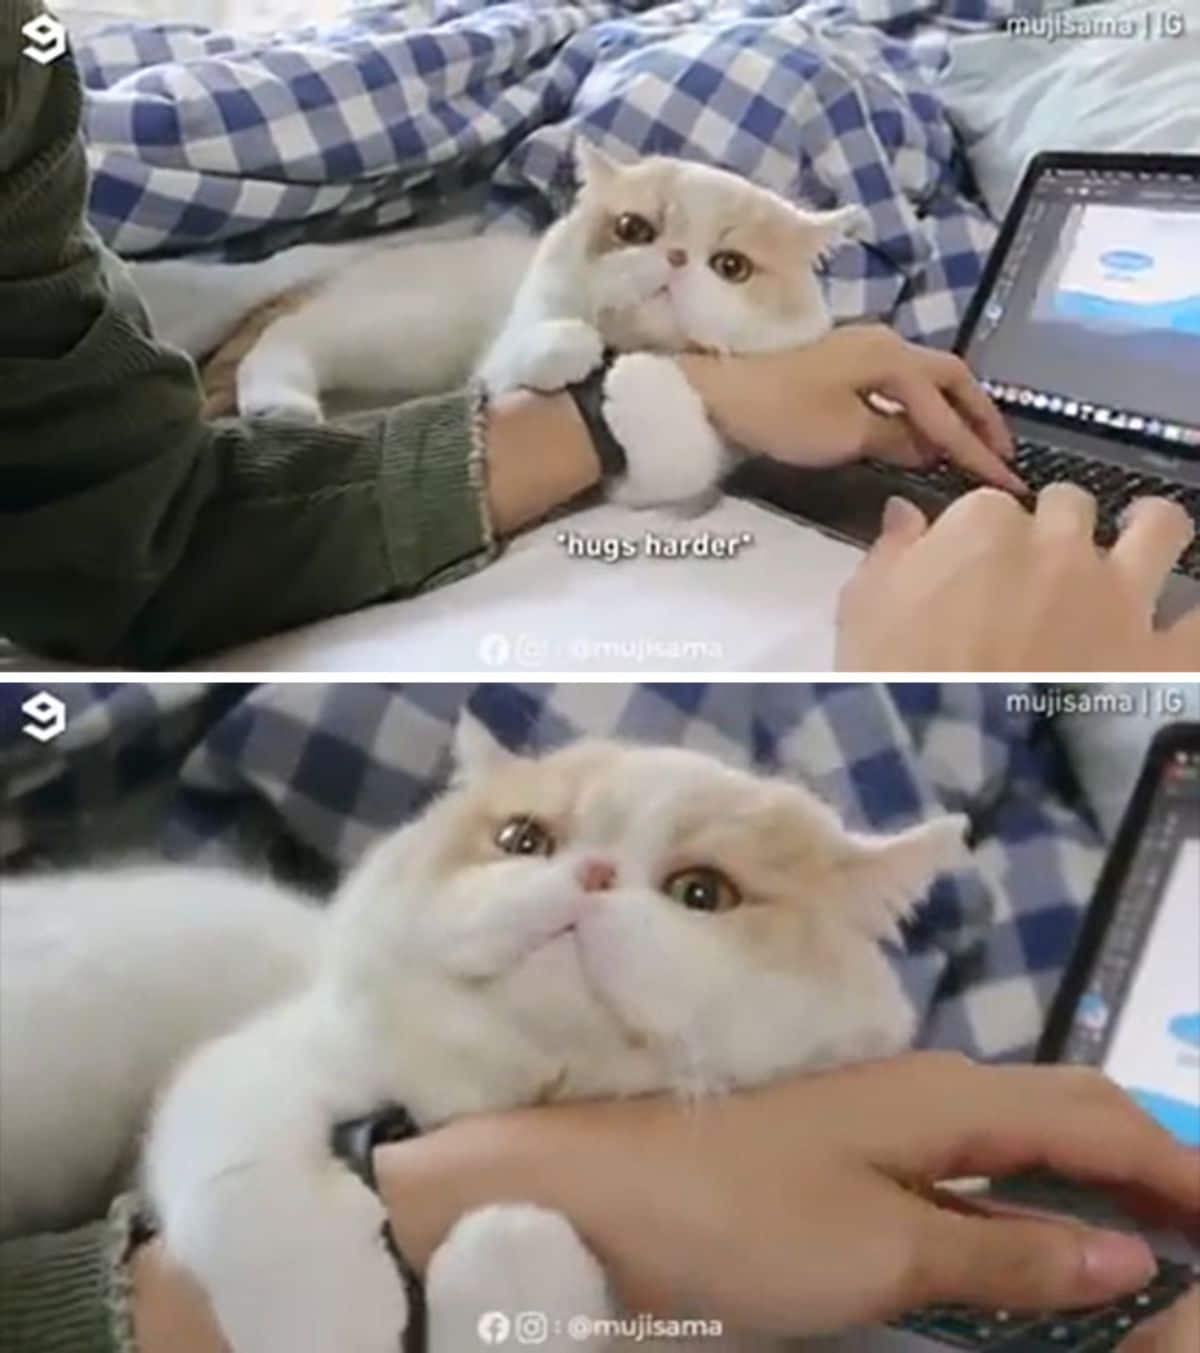 2 photos of a white and orange persian cat hugging the hand of someone working on a laptop